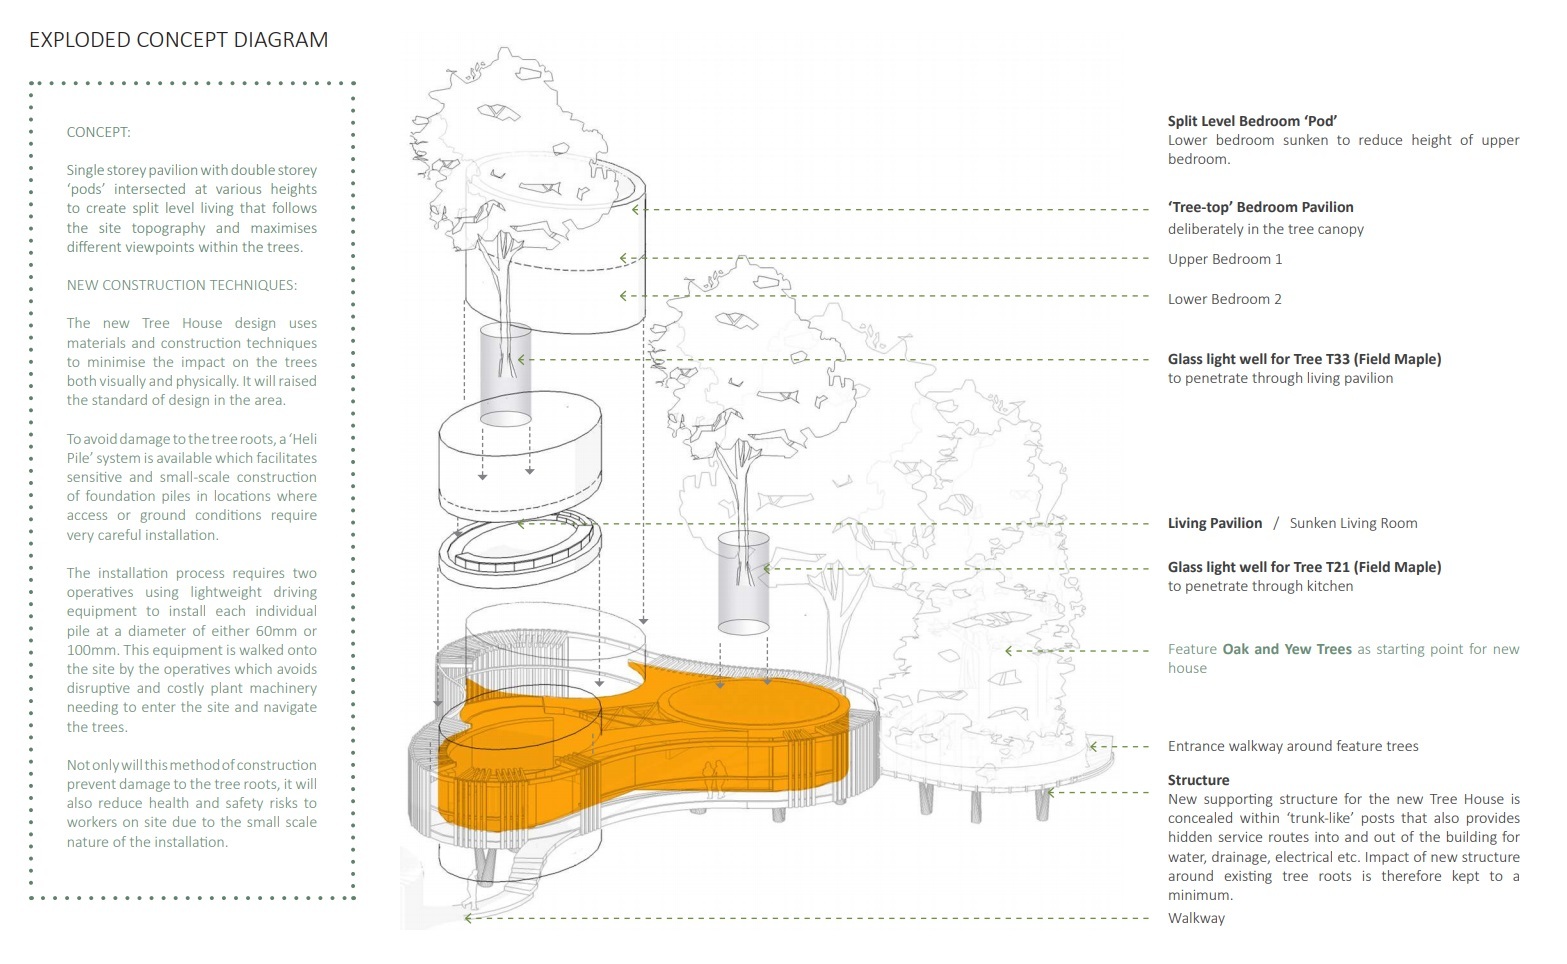 Designs for ‘The Tree House’ in Hids Copse Road, Cumnor Hill, Oxford, submitted to Vale of White Horse District Council. Picture: Western Design Architects